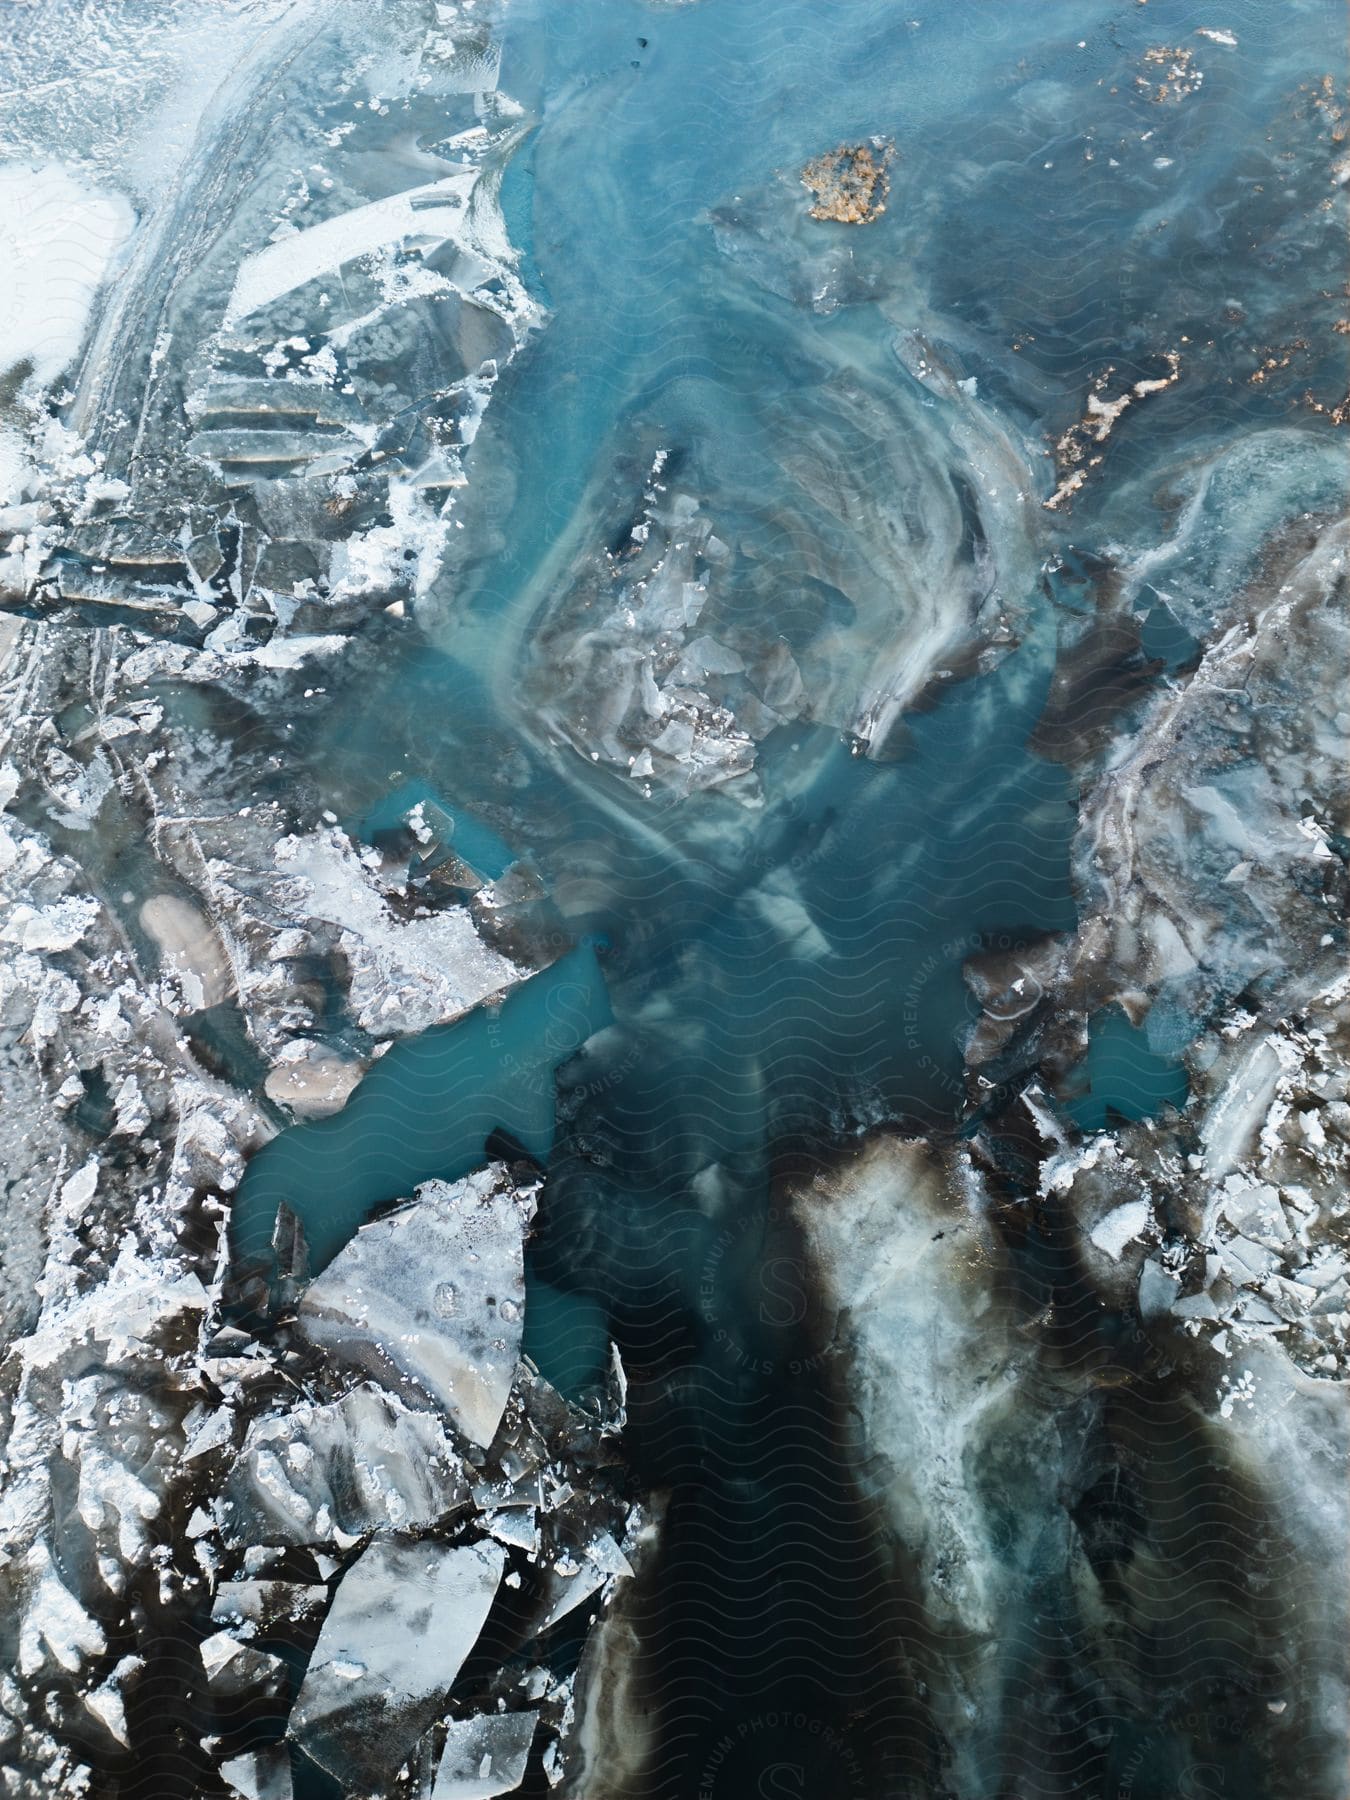 Rock, ice and water viewed from above.